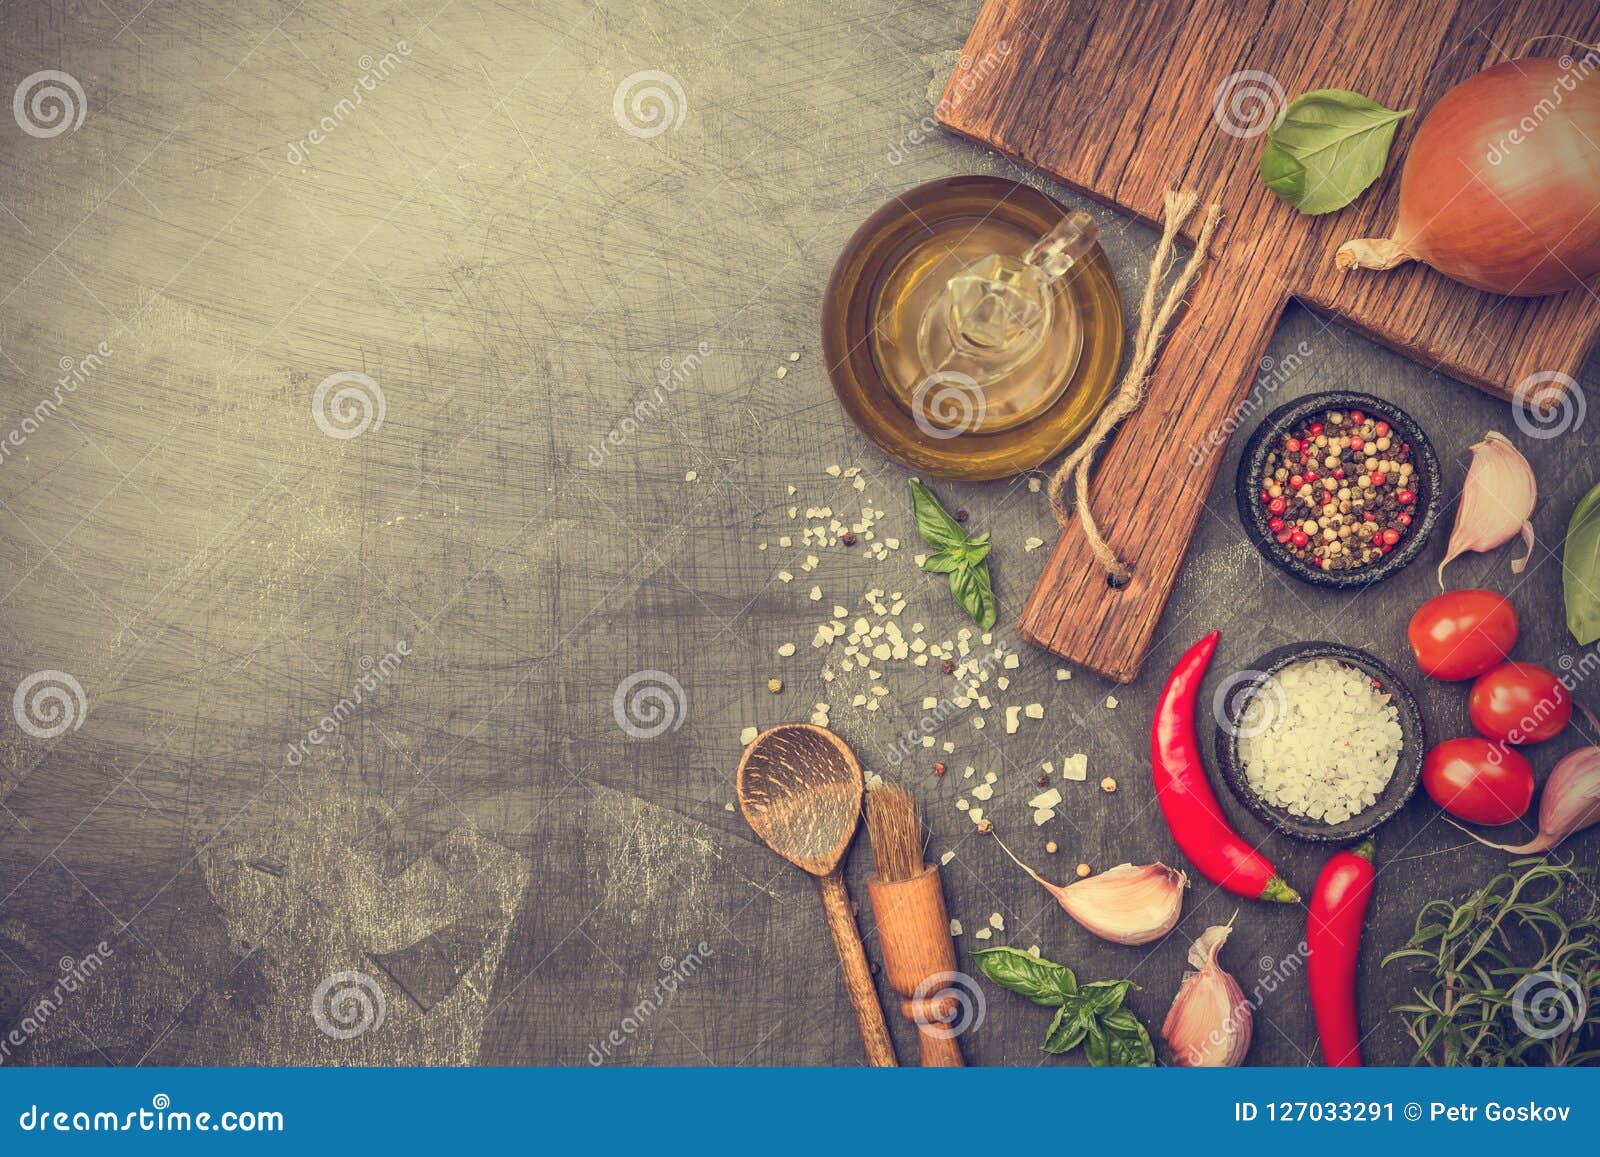 Ingredients for cooking stock image. Image of basil - 127033291